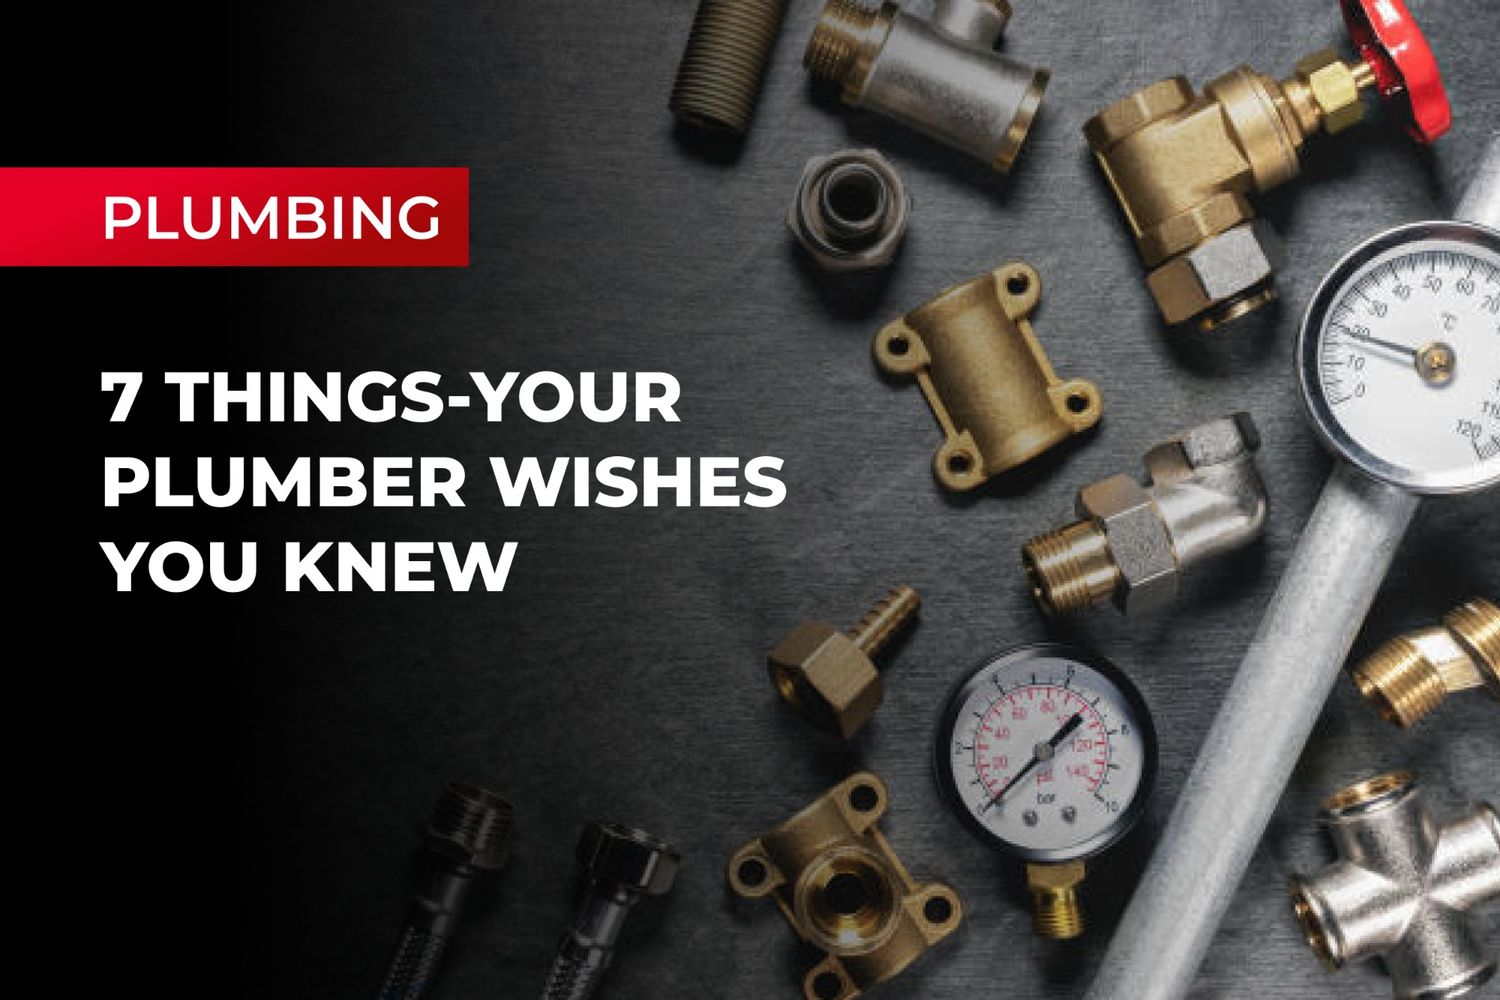 7 Things Your Plumber Wishes You Knew